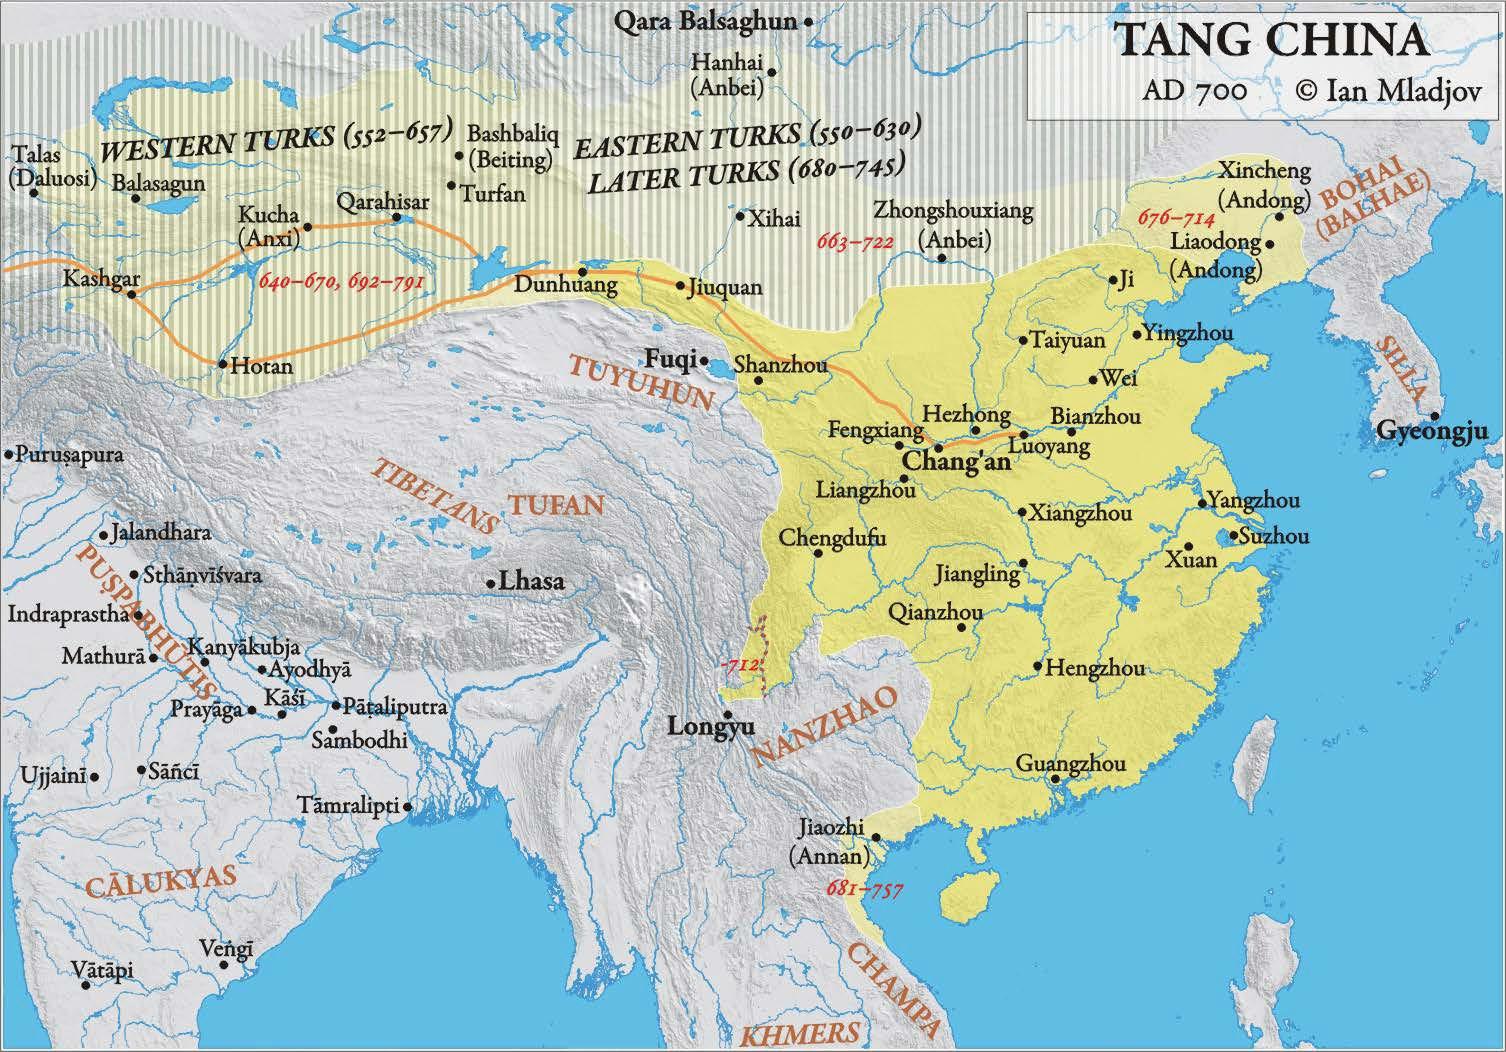 Map of The Tang Dynasty at its height in 700 CE